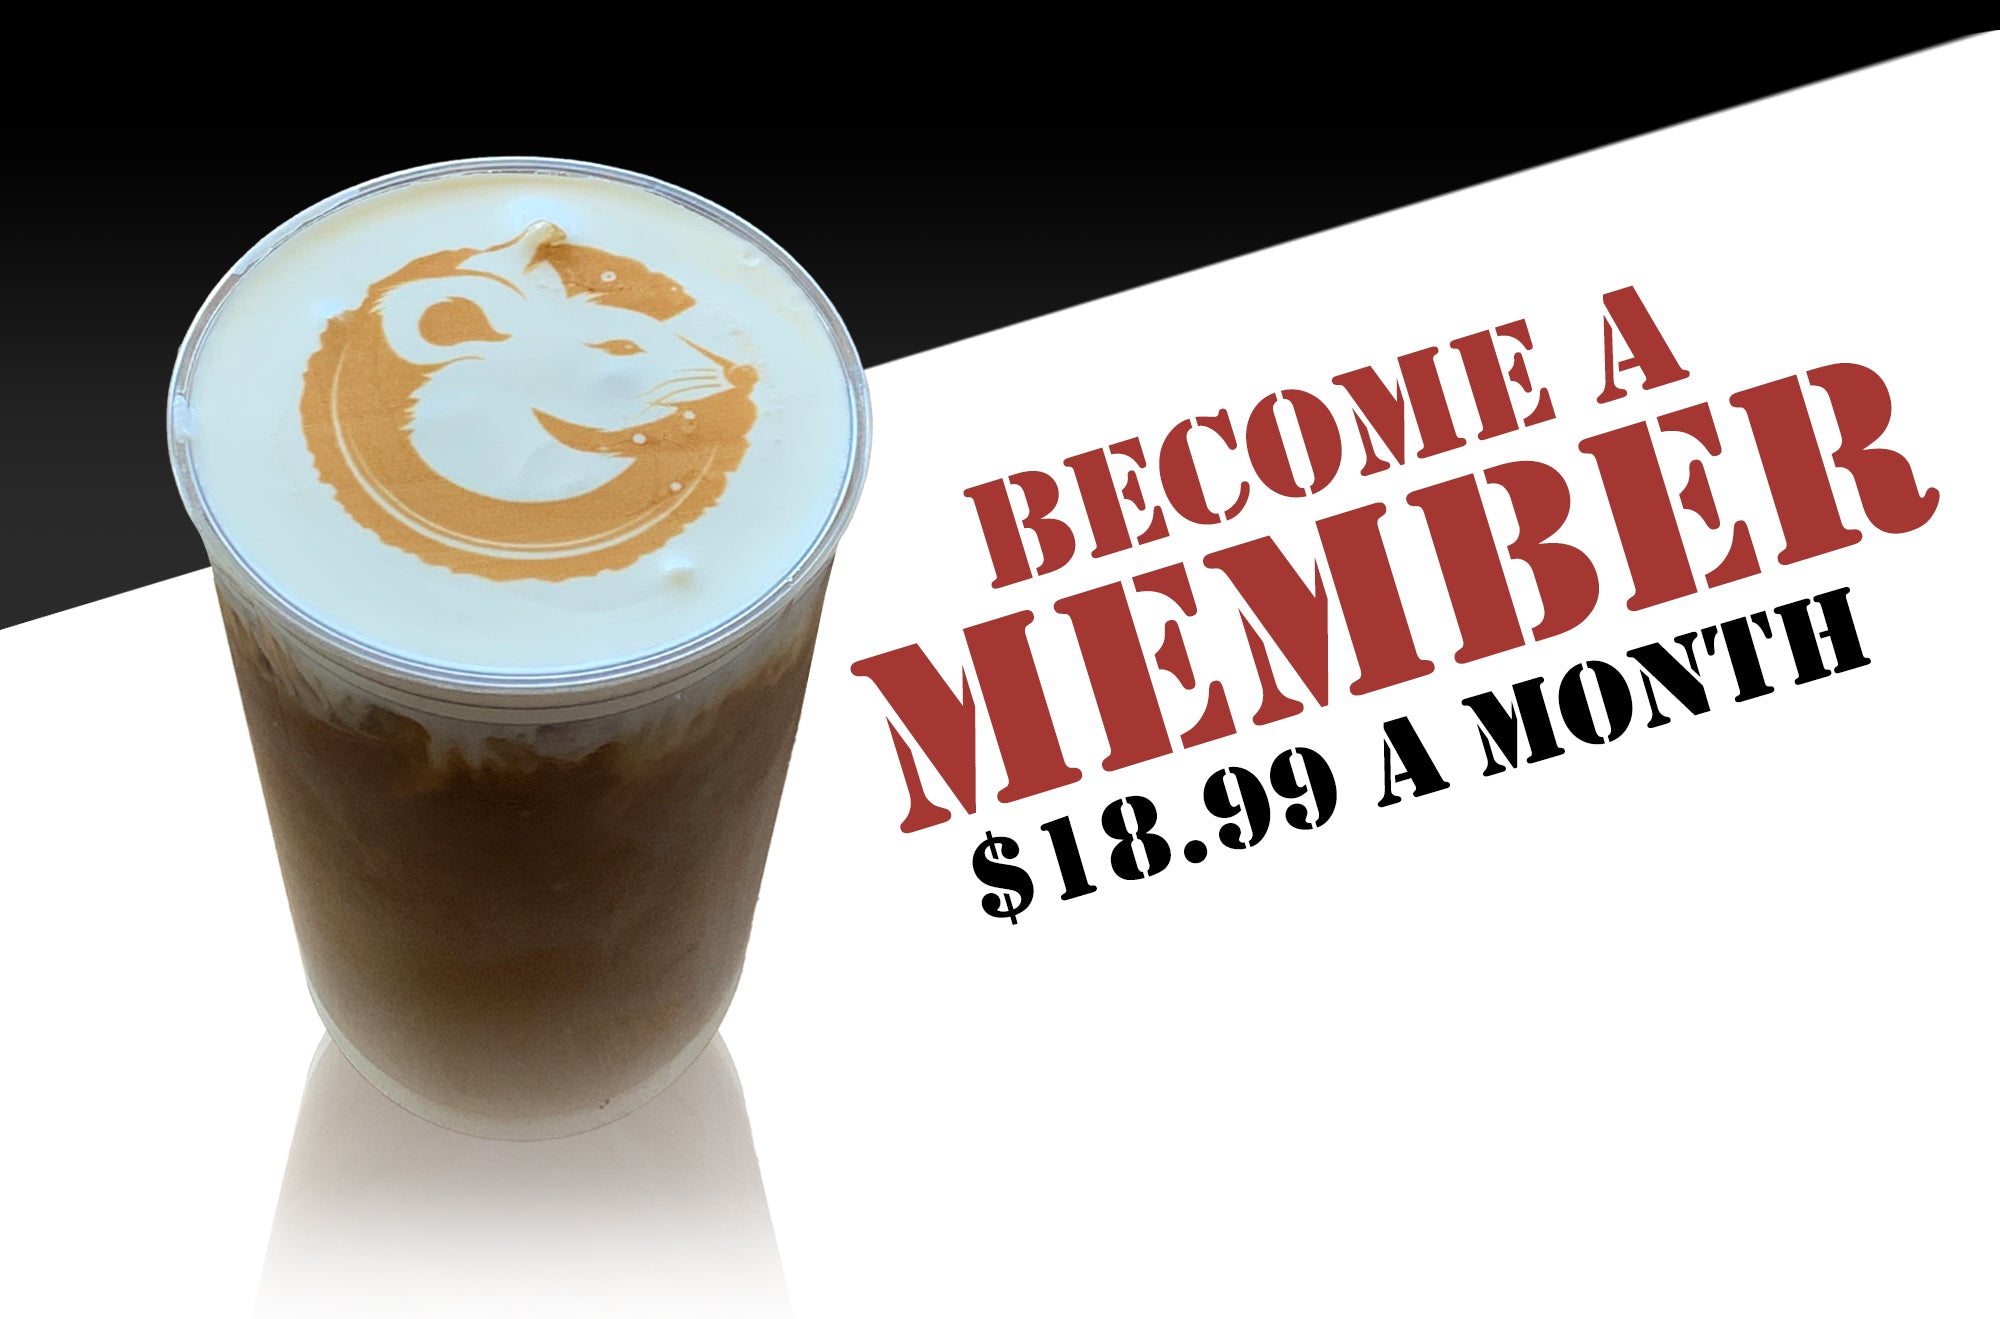 Join the coffee club